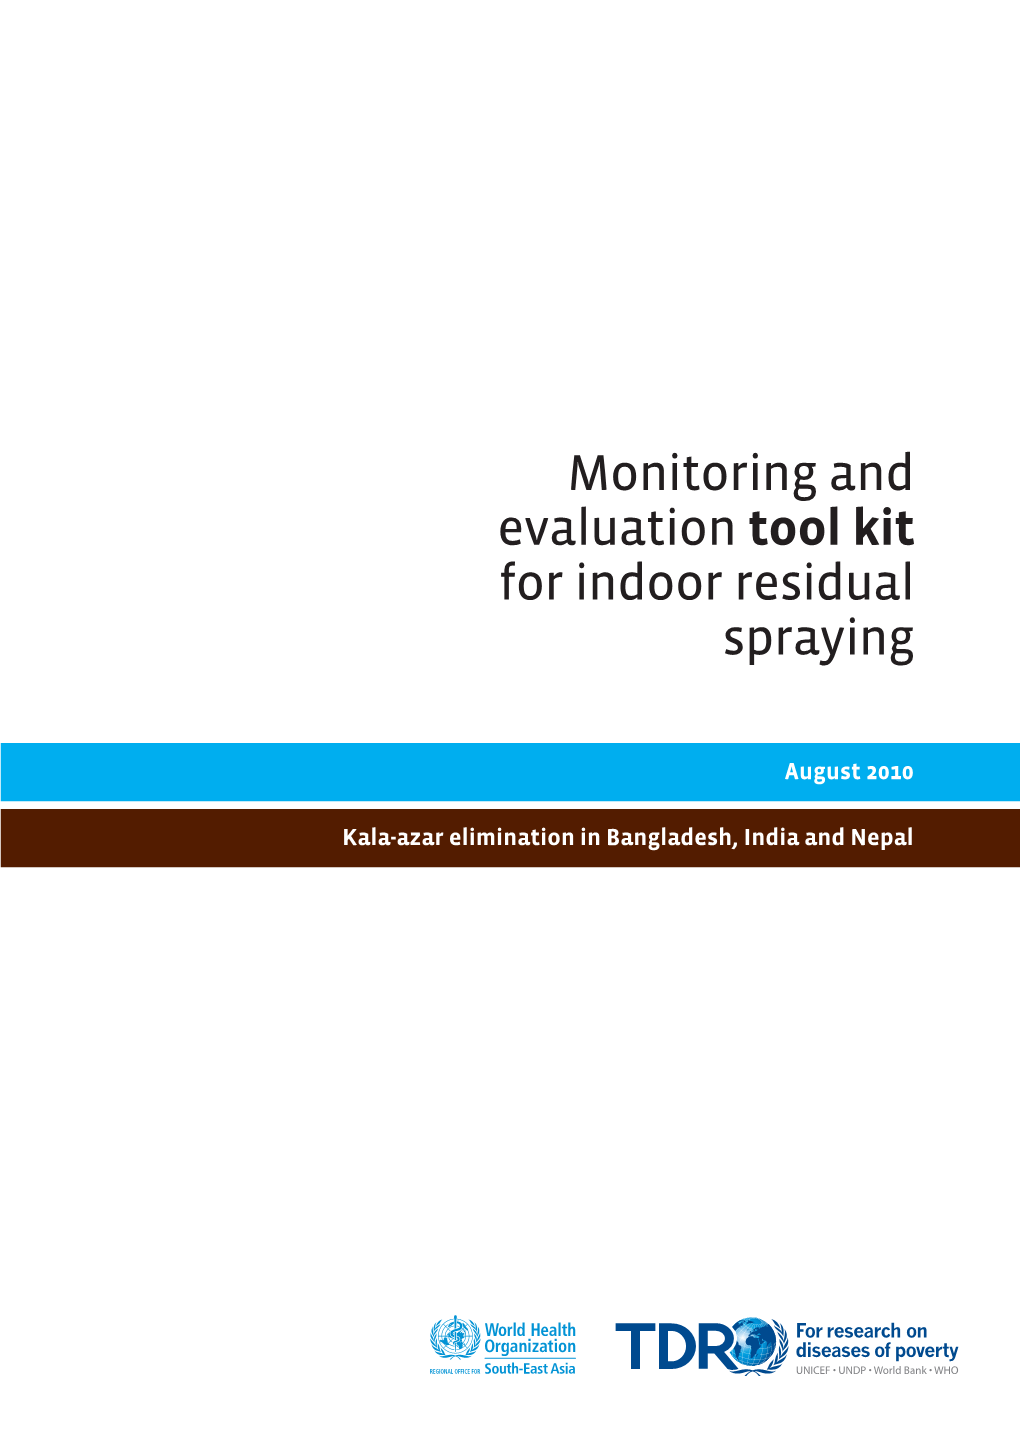 Monitoring and Evaluation Tool Kit for Indoor Residual Spraying (IRS)